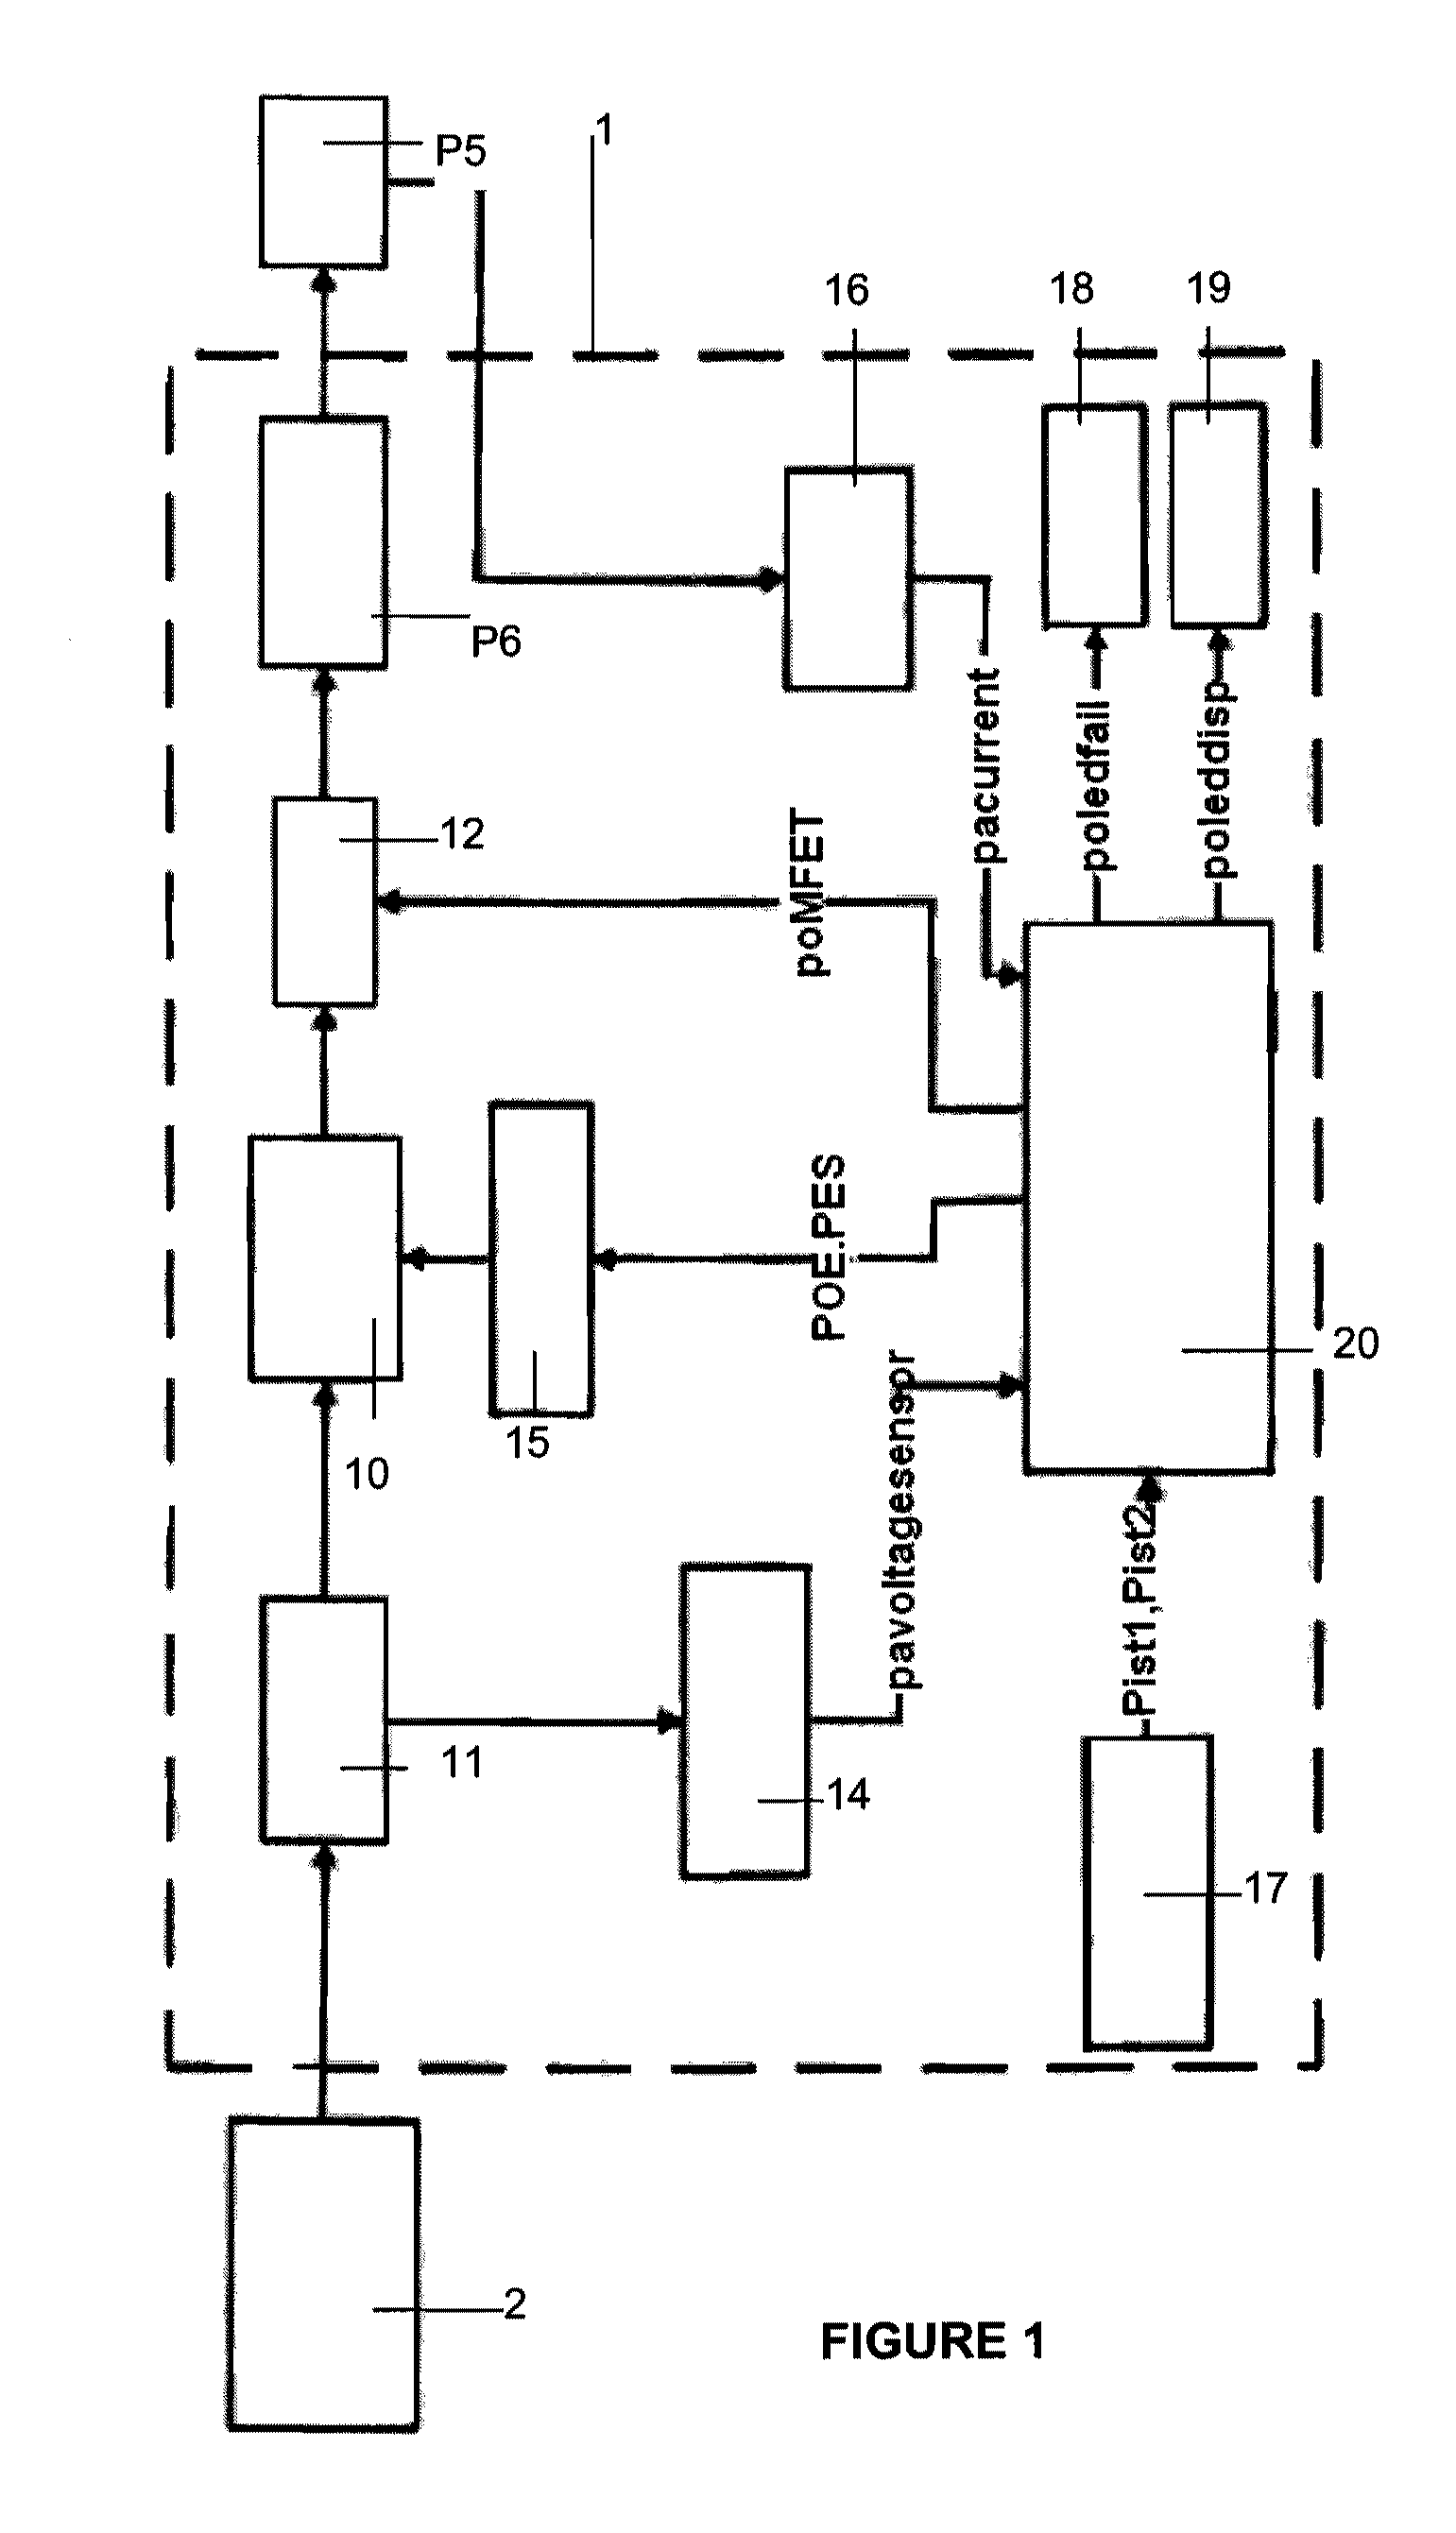 Feeding system for an inductive load from an energy source with variable power